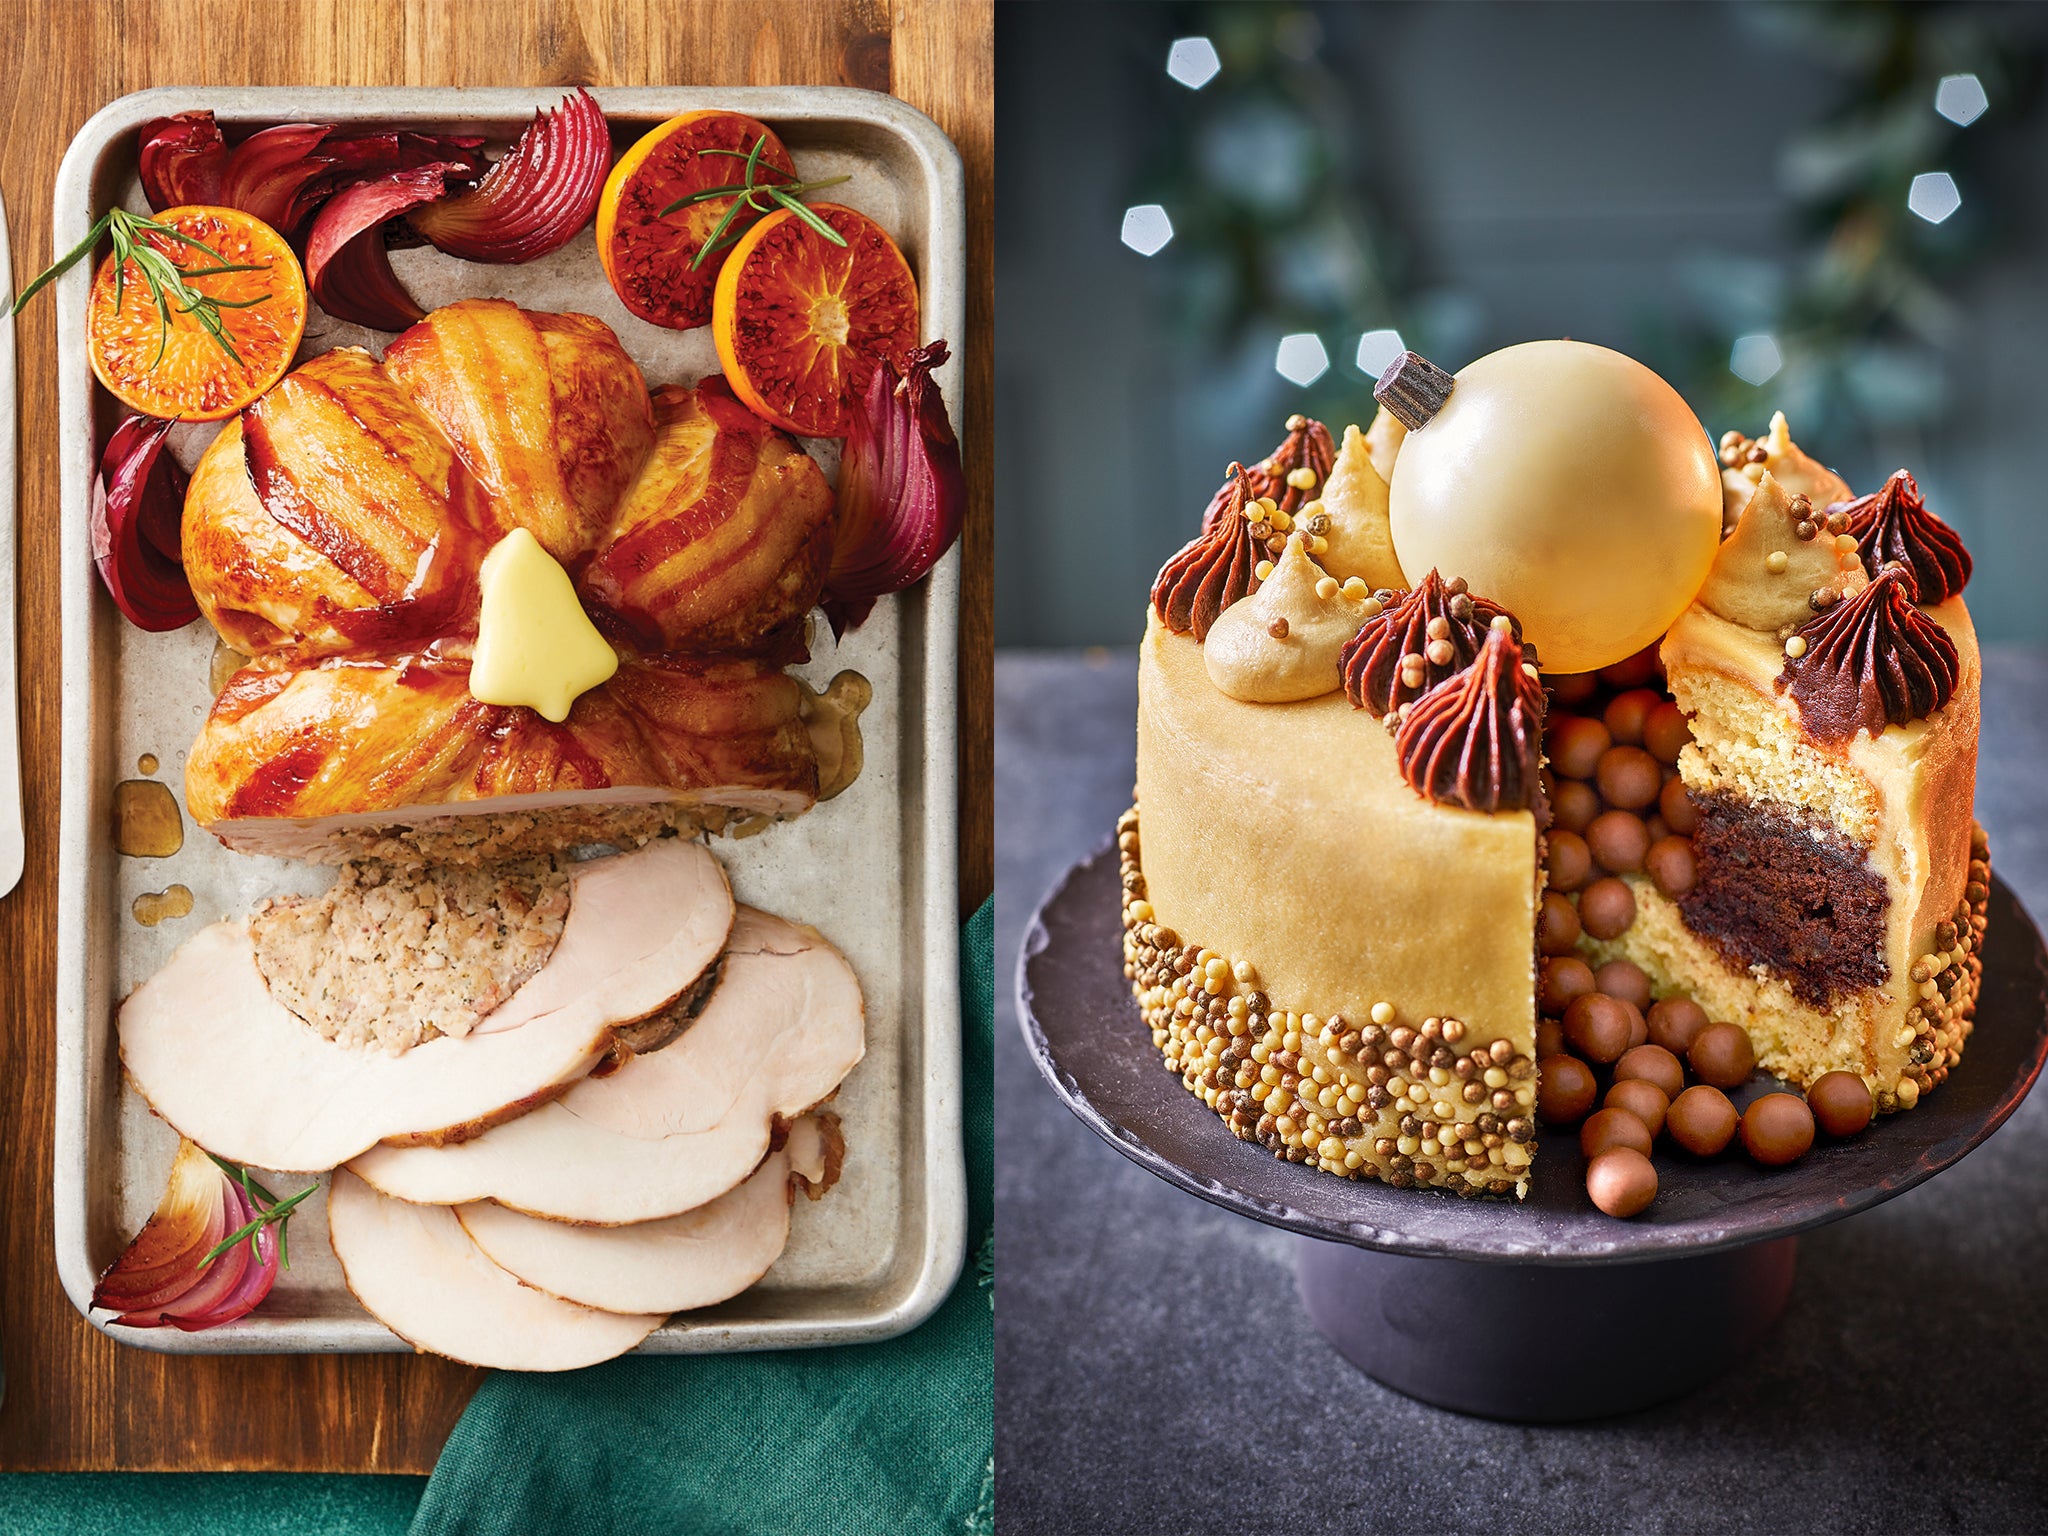 The Best Christmas Food 2020 - All Things Christmas